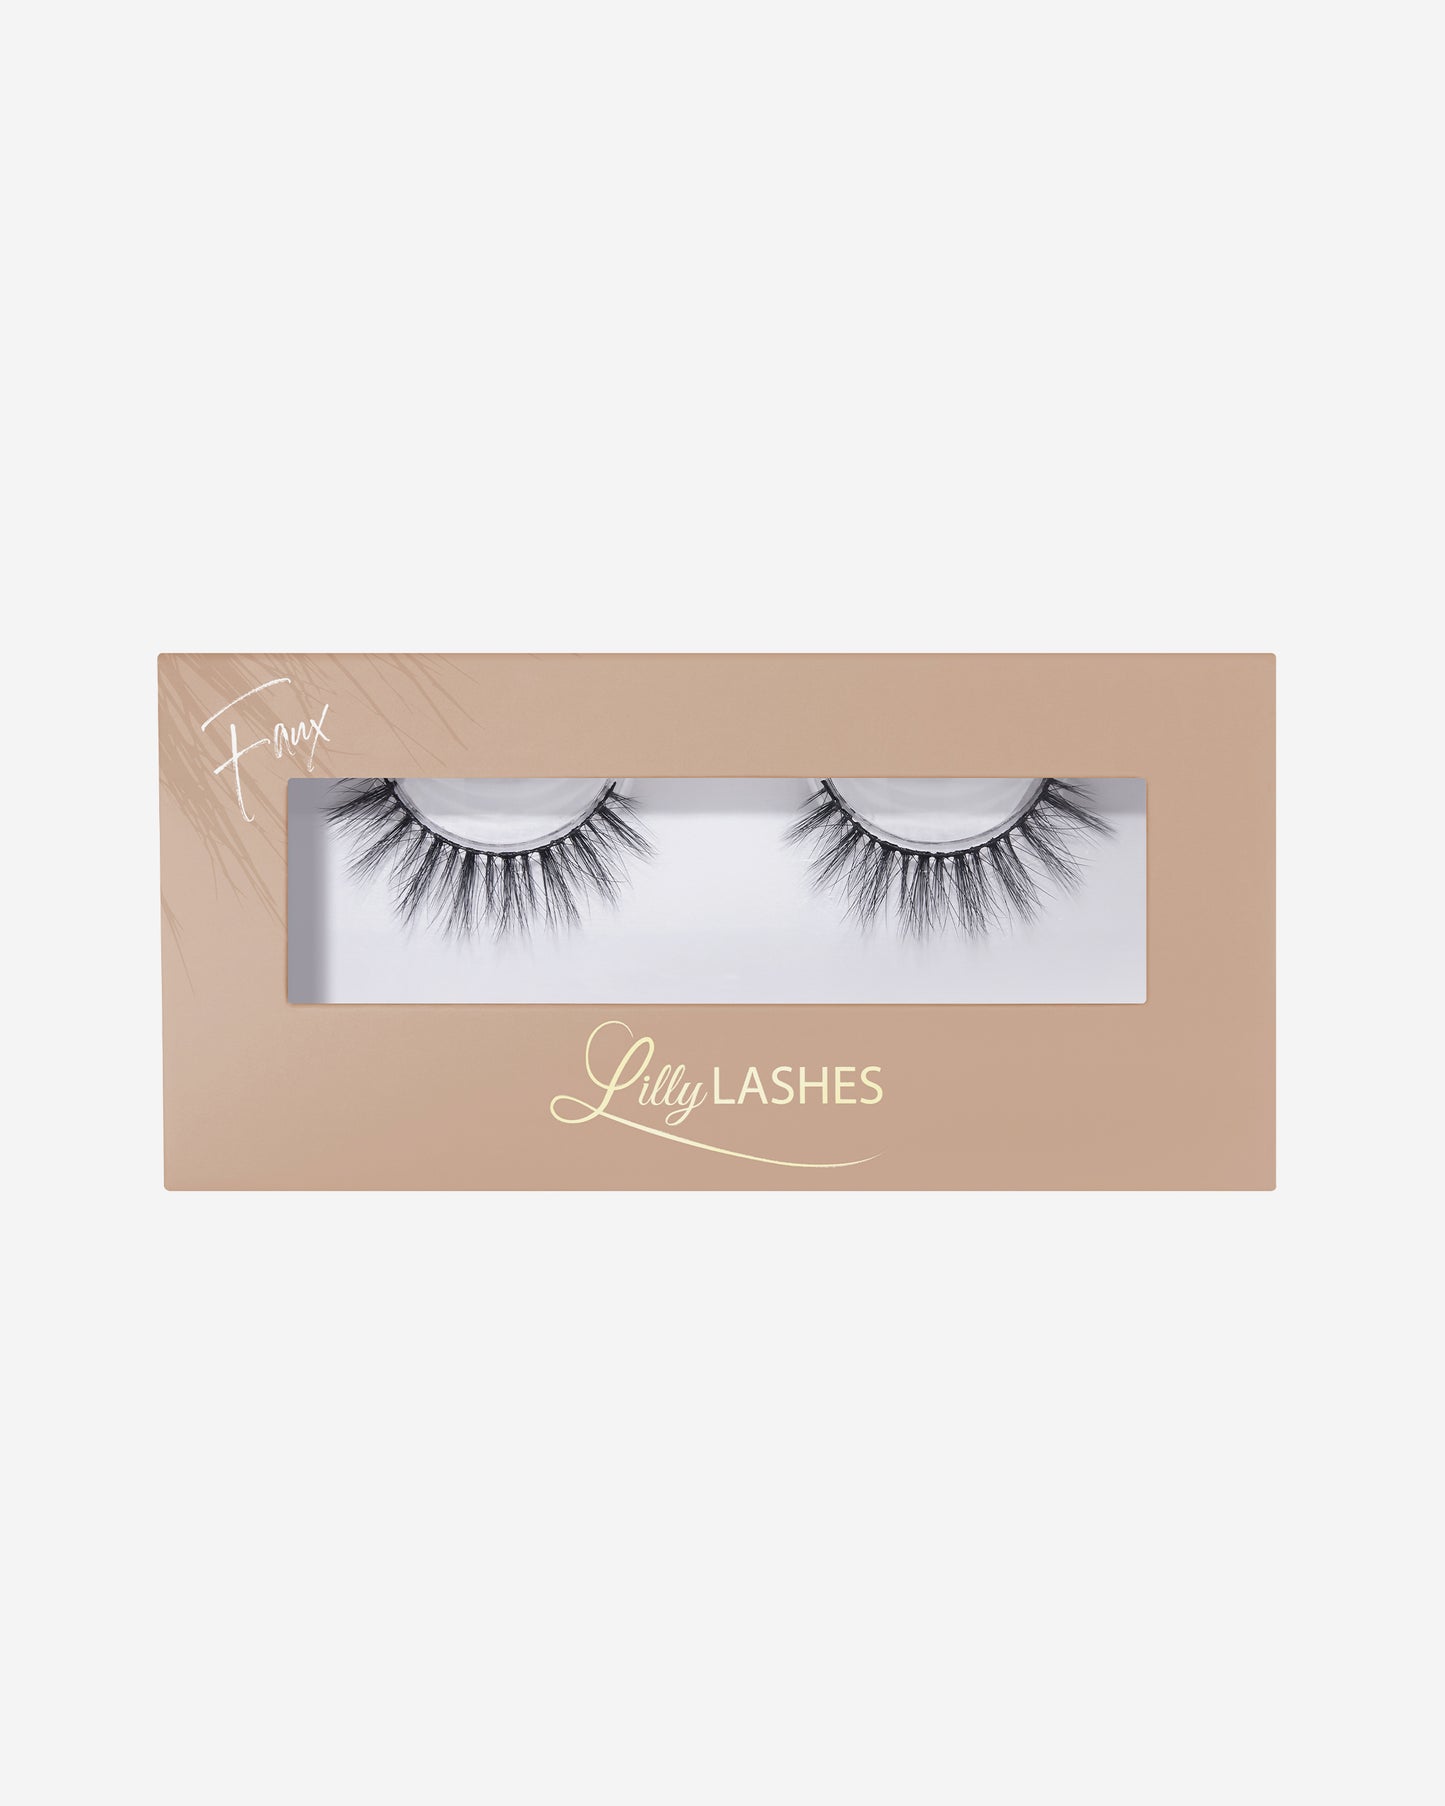 Lilly Lashes | Everyday | Stripped Down | Front of Box